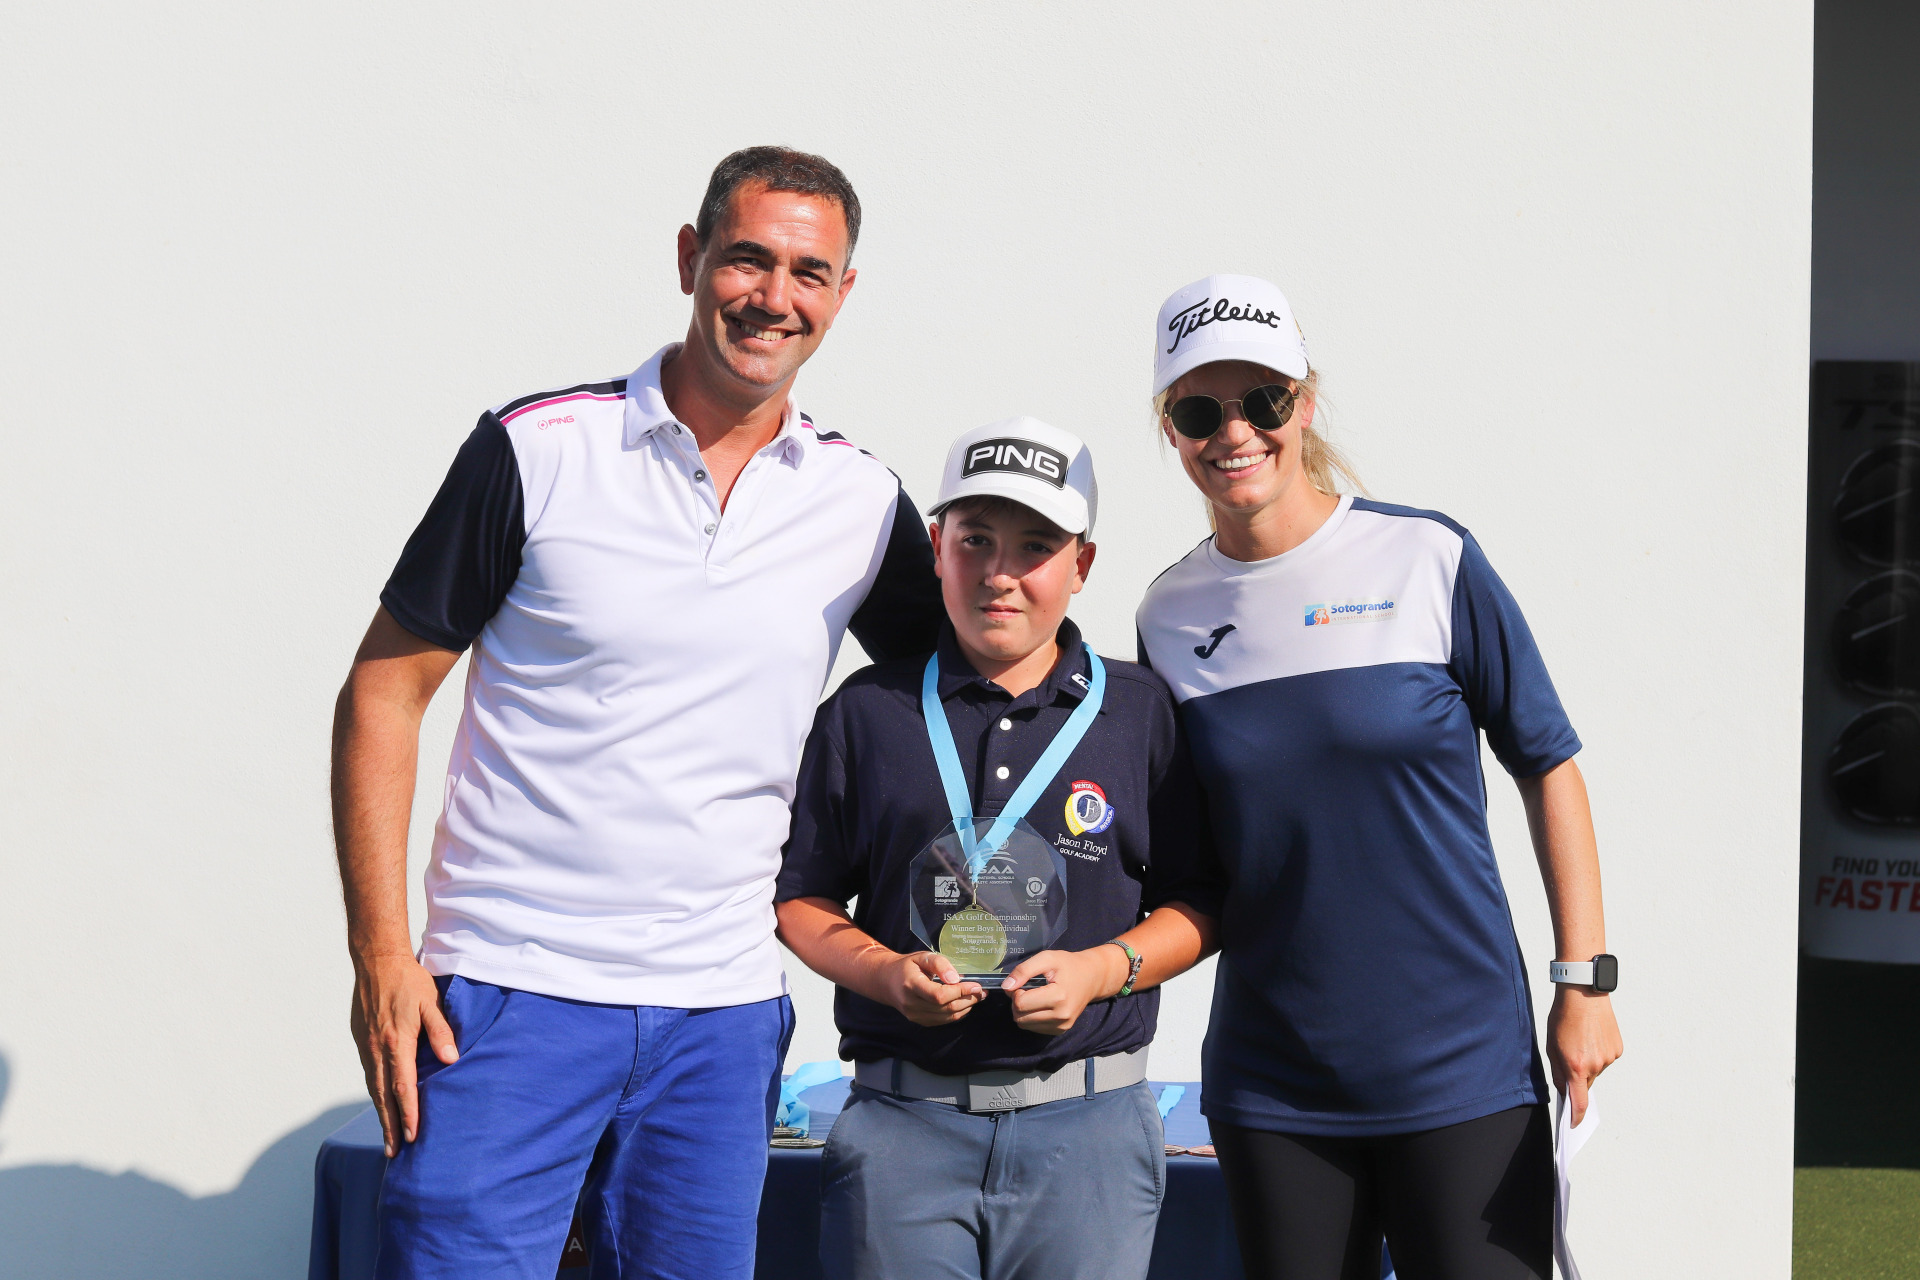 First place winner in the boys category, Esteban Ledesma Orozco who is from Sotogrande international School.